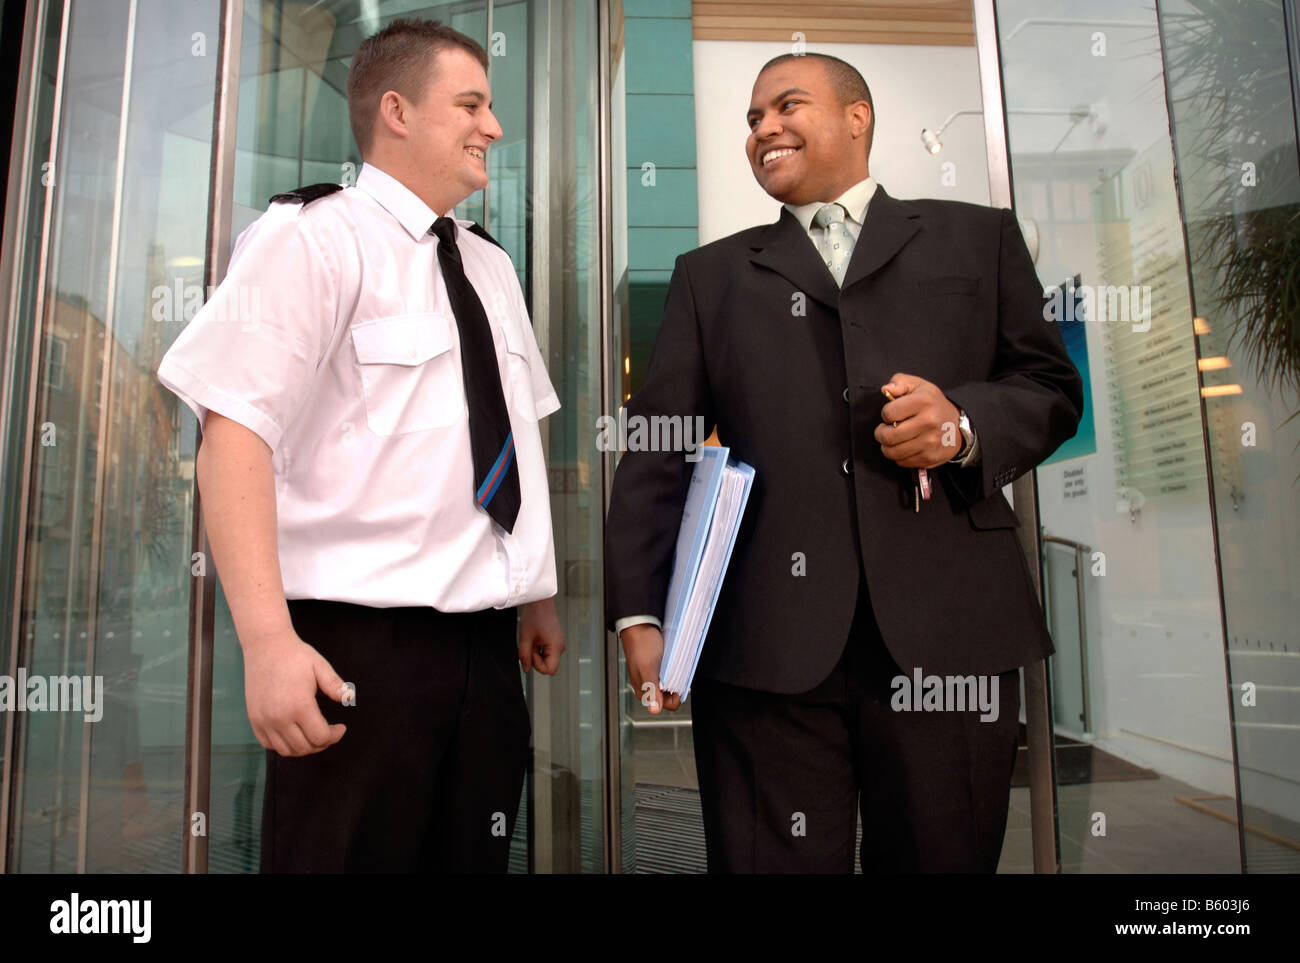 A SECURITY GUARD ON PATROL UNLOCKS THE DOOR OF A BUSINESS PREMISES TO ALLOW A LATE WORKING EMPLOYEE TO LEAVE UK Stock Photo